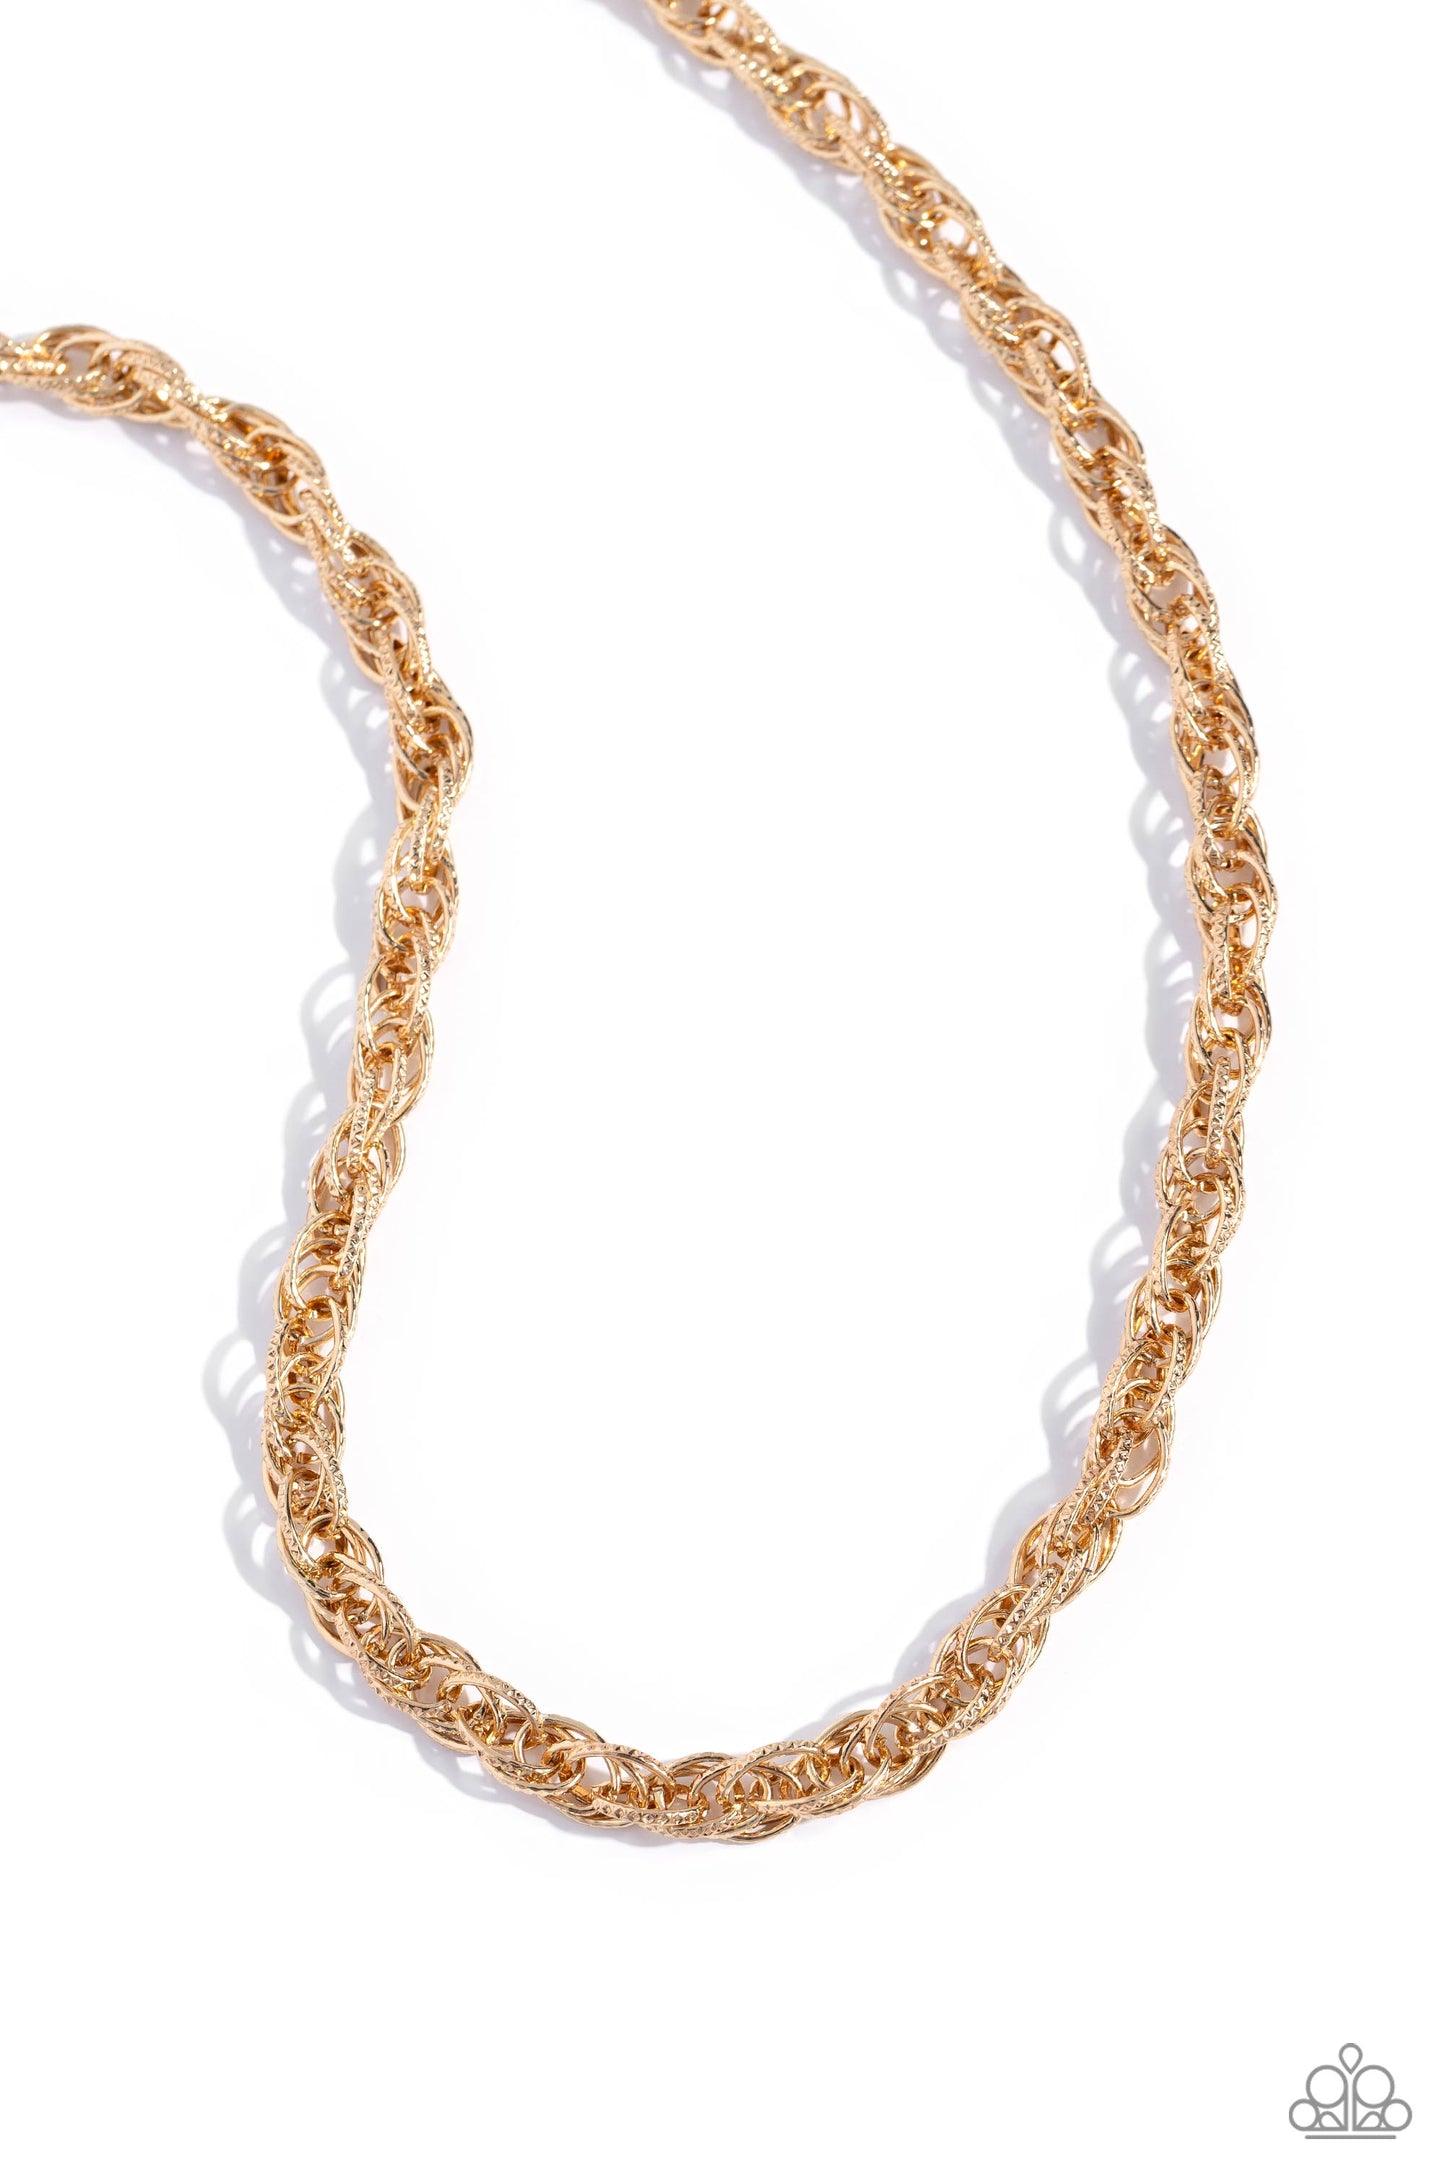 Braided Ballad Gold Rope Necklace - Paparazzi Accessories  Rings of gold, each embroidered in tactile texture weave into an interconnected braided centerpiece for a monochromatic chic look. Features an adjustable clasp closure.  Sold as one individual necklace. Includes one pair of matching earrings.  Sku:  P2ED-GDXX-159XX